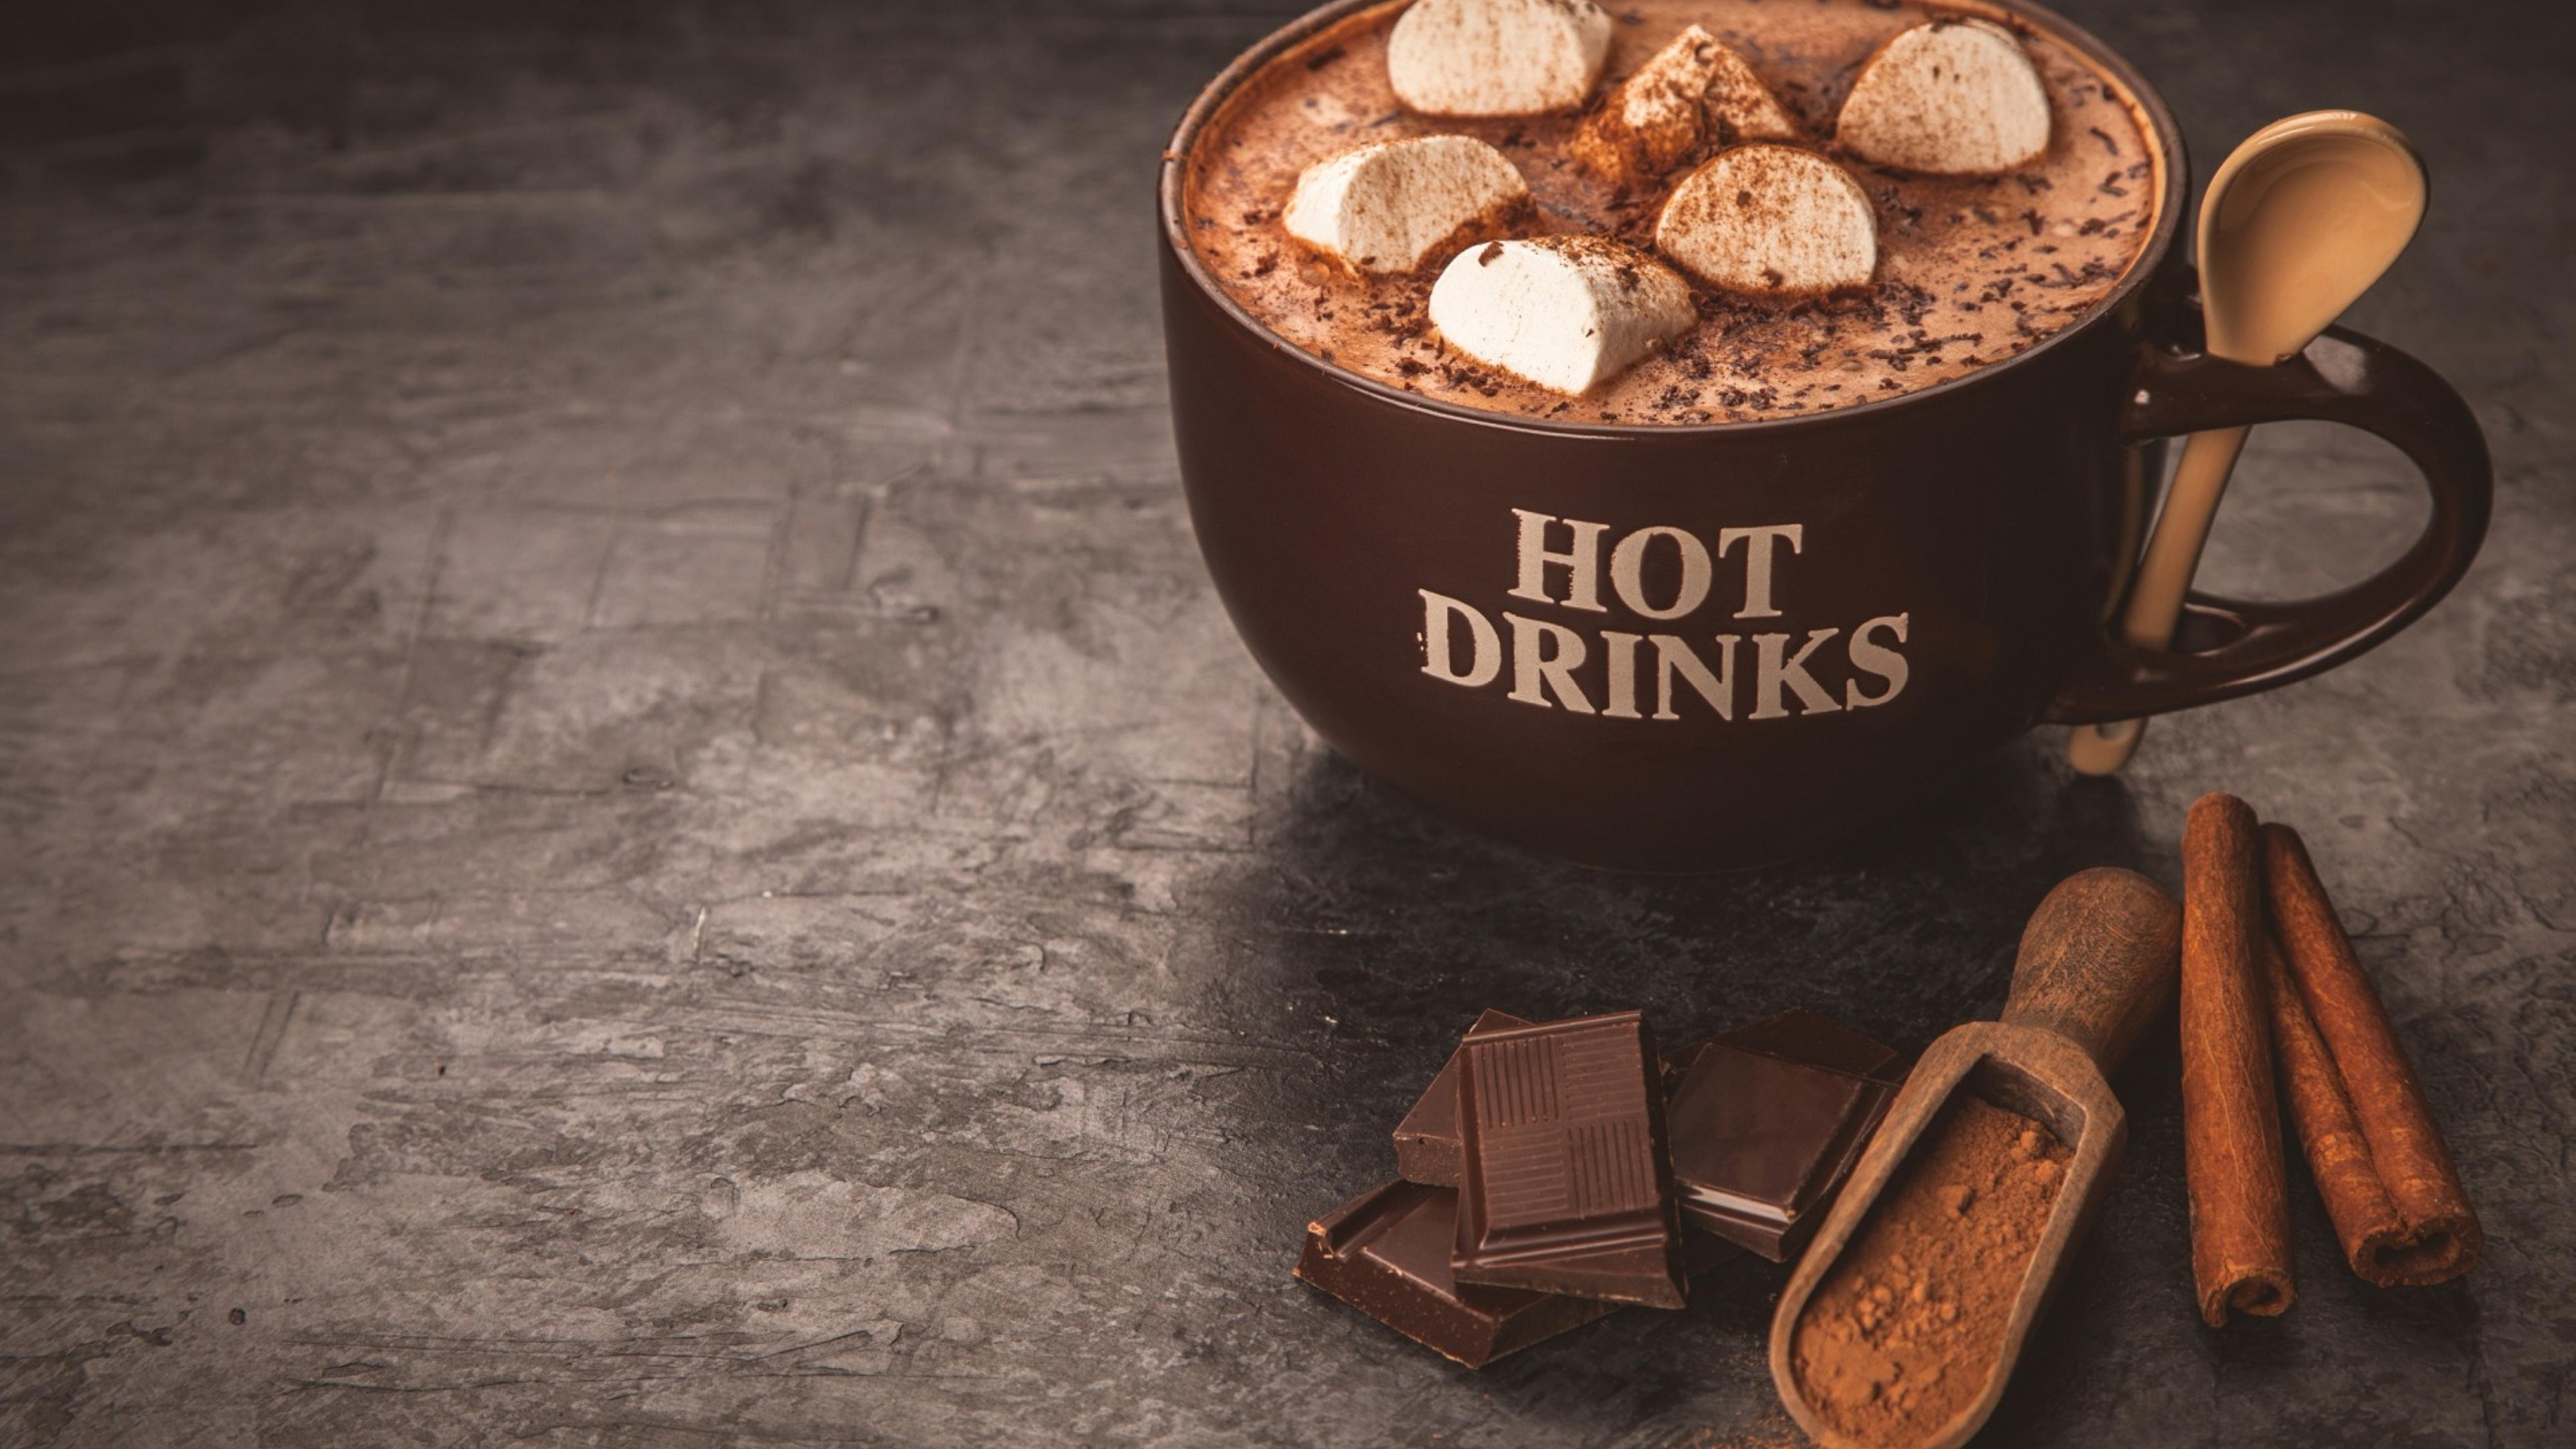 A cup of hot drinks with marshmallows and cinnamon - Chocolate, marshmallows